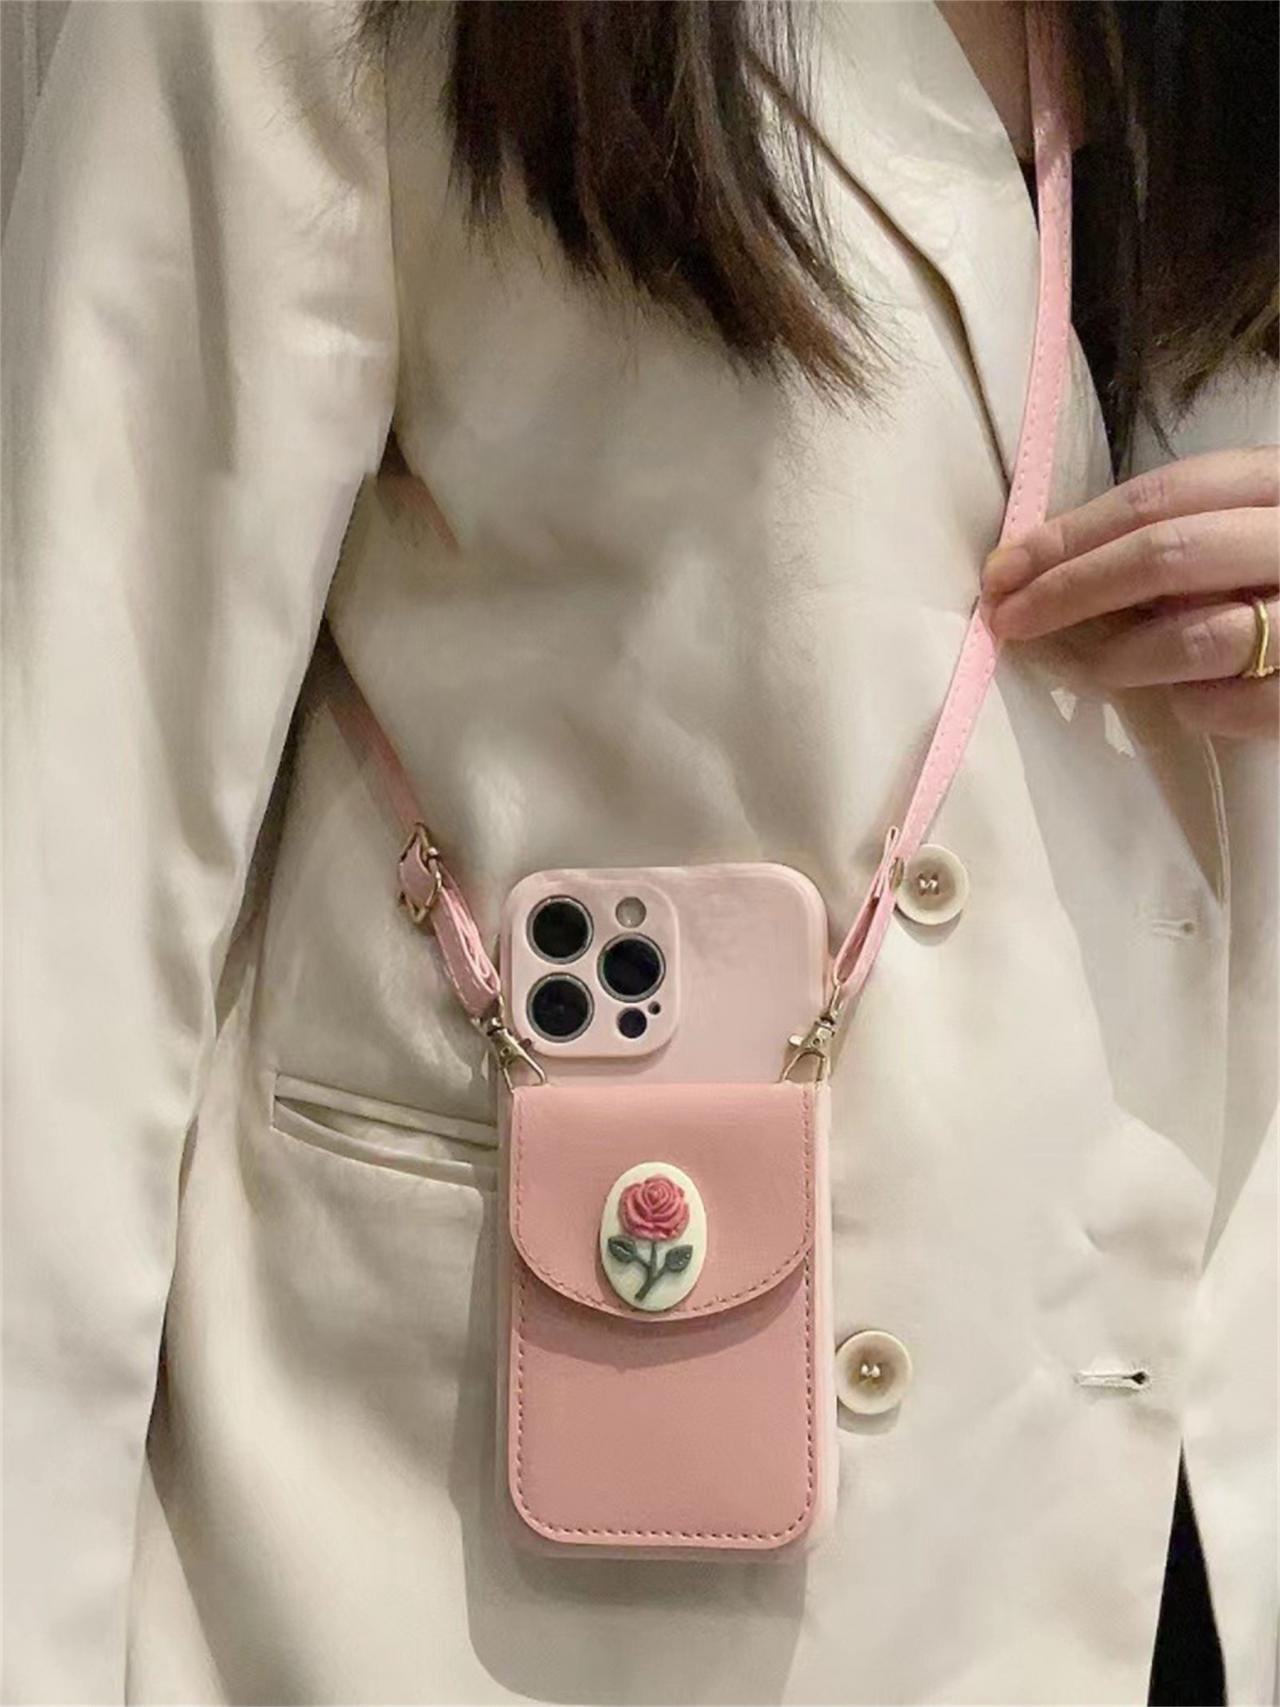 Luxury Crossbody Leather Lanyard Card Bag Pink Flower Case For Iphone 11 12 13 14 Pro